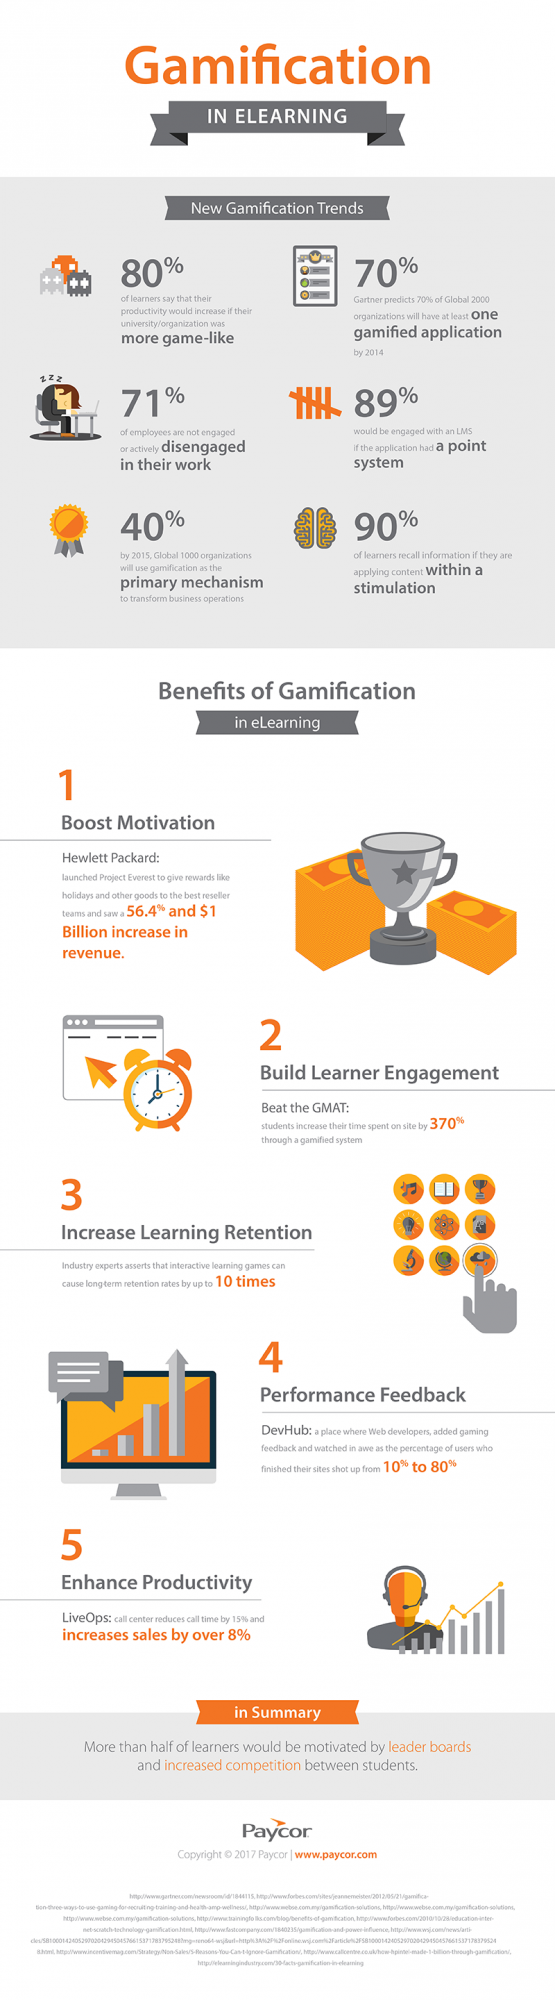 Gamification in e-Learning